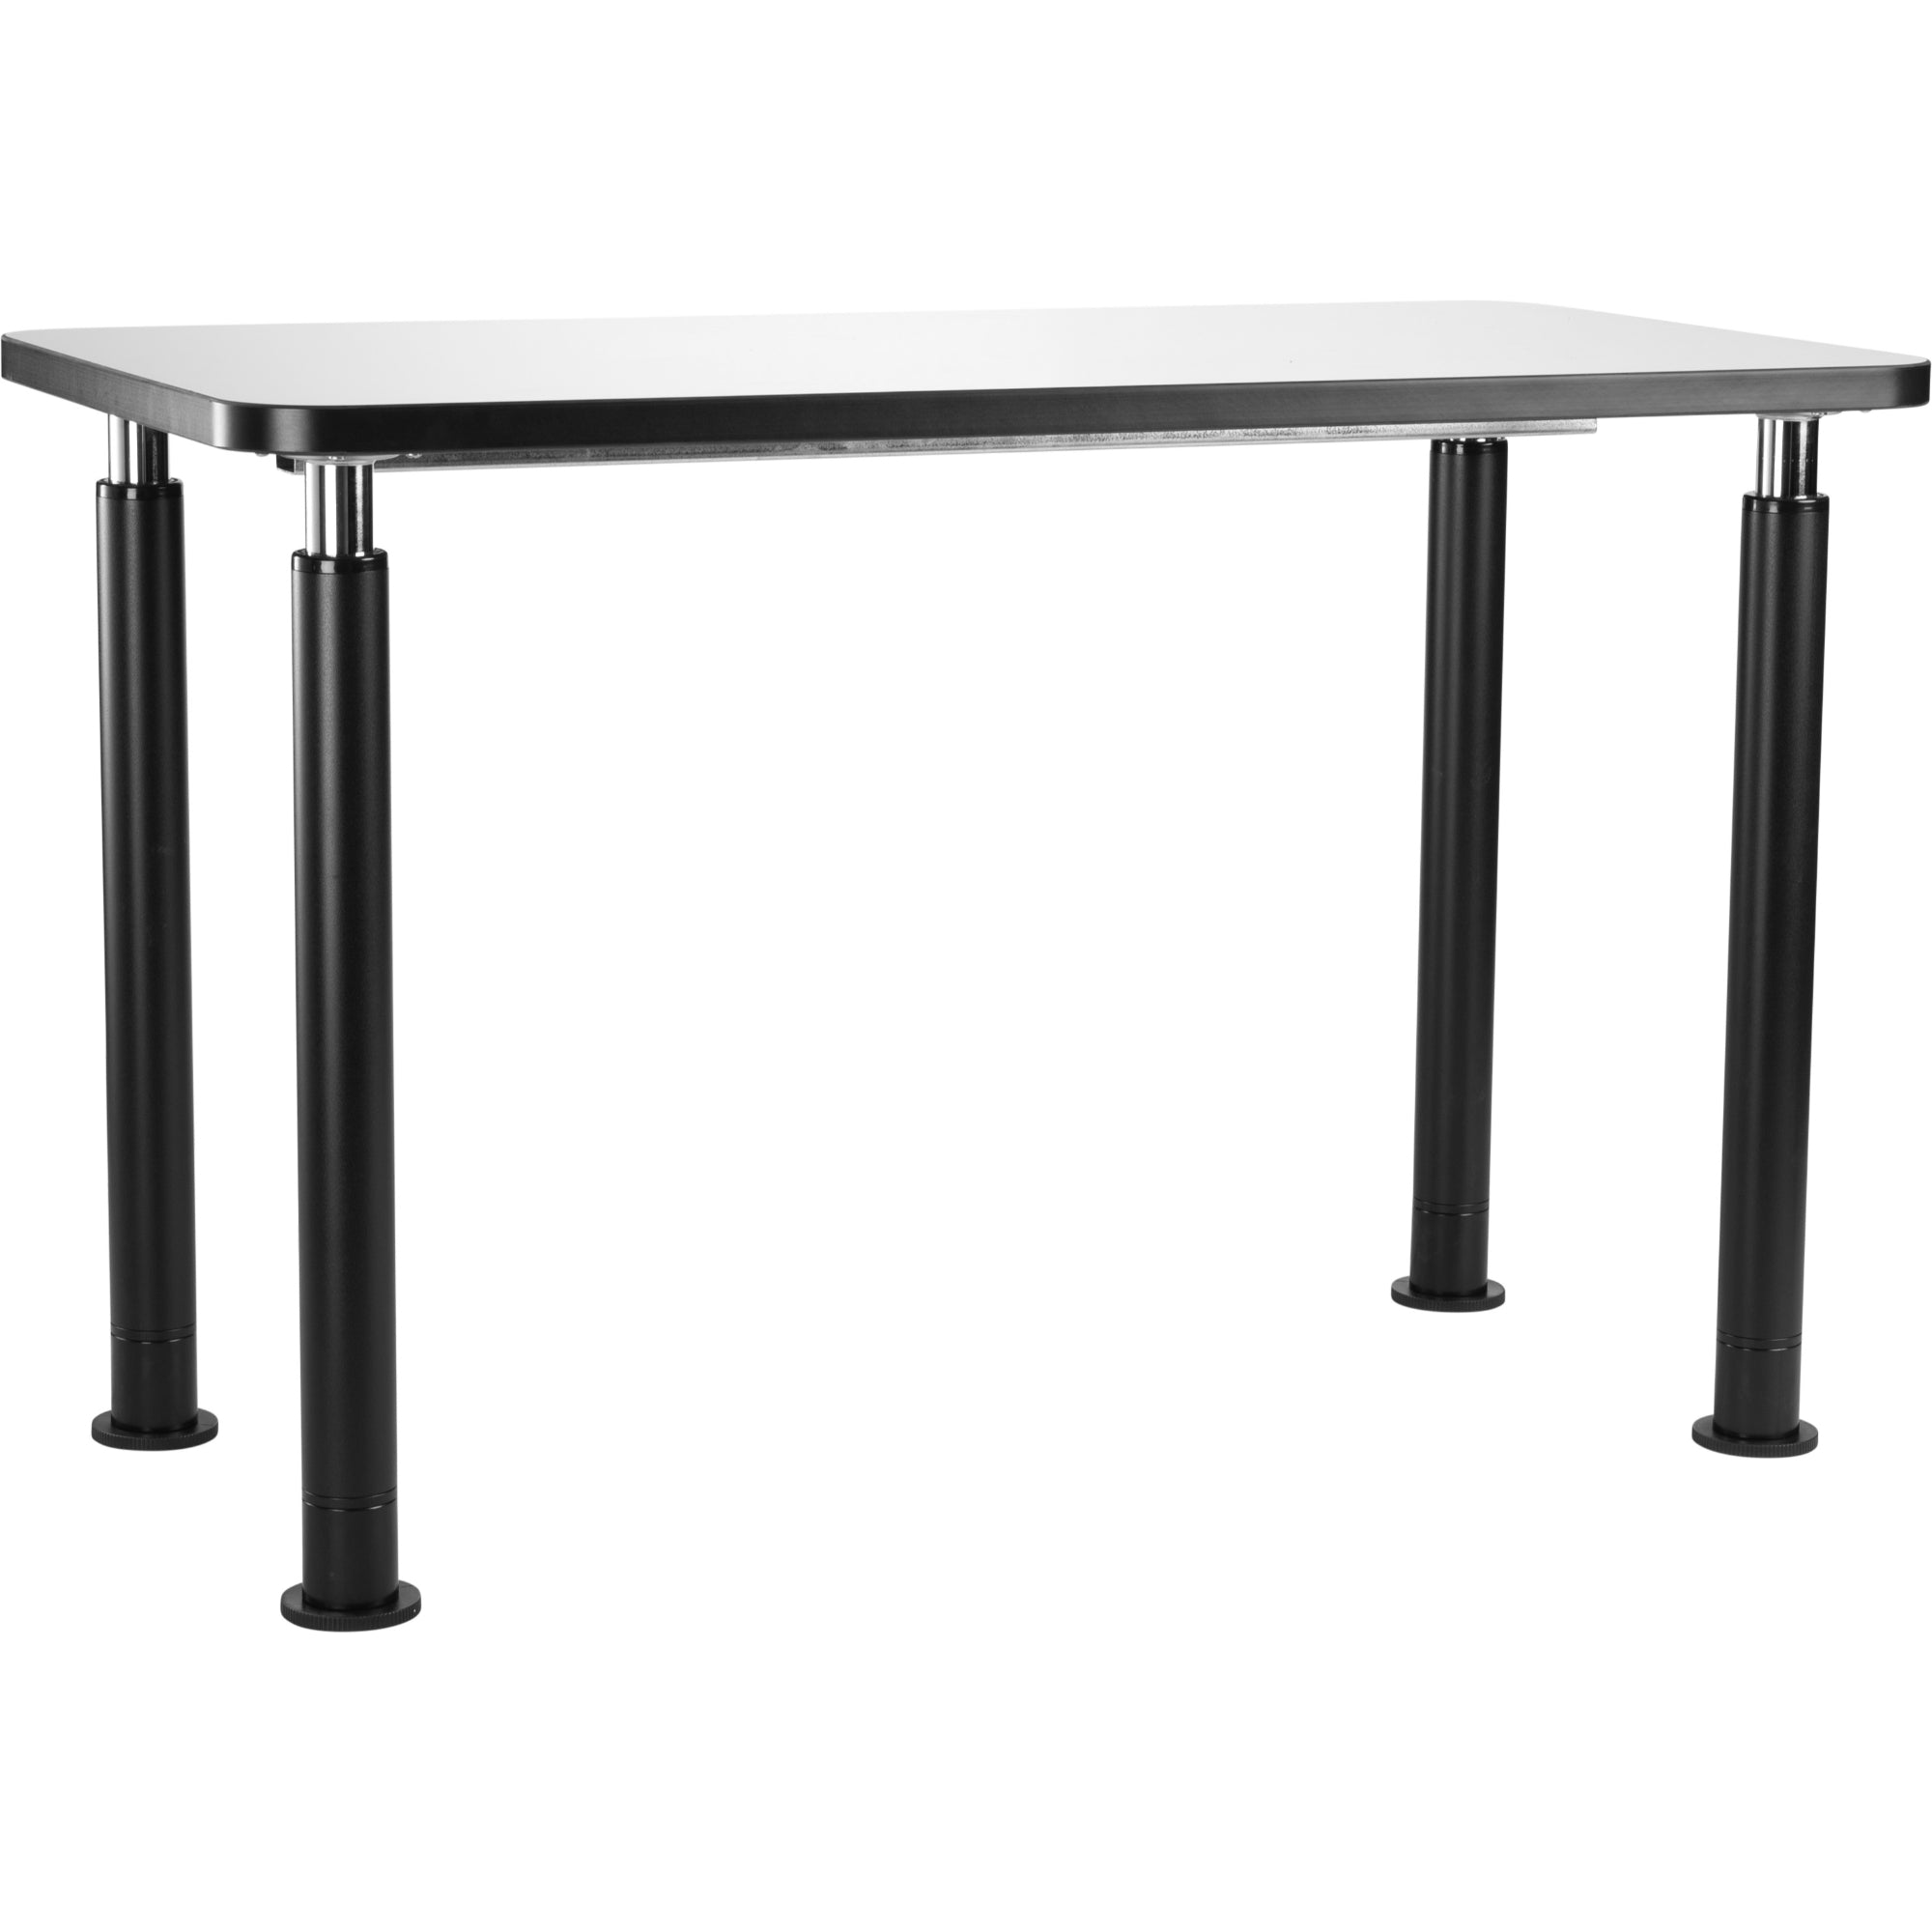 Designer Series Adjustable Height Science Table, 24" x 48" x 27"-42" H, Whiteboard Top